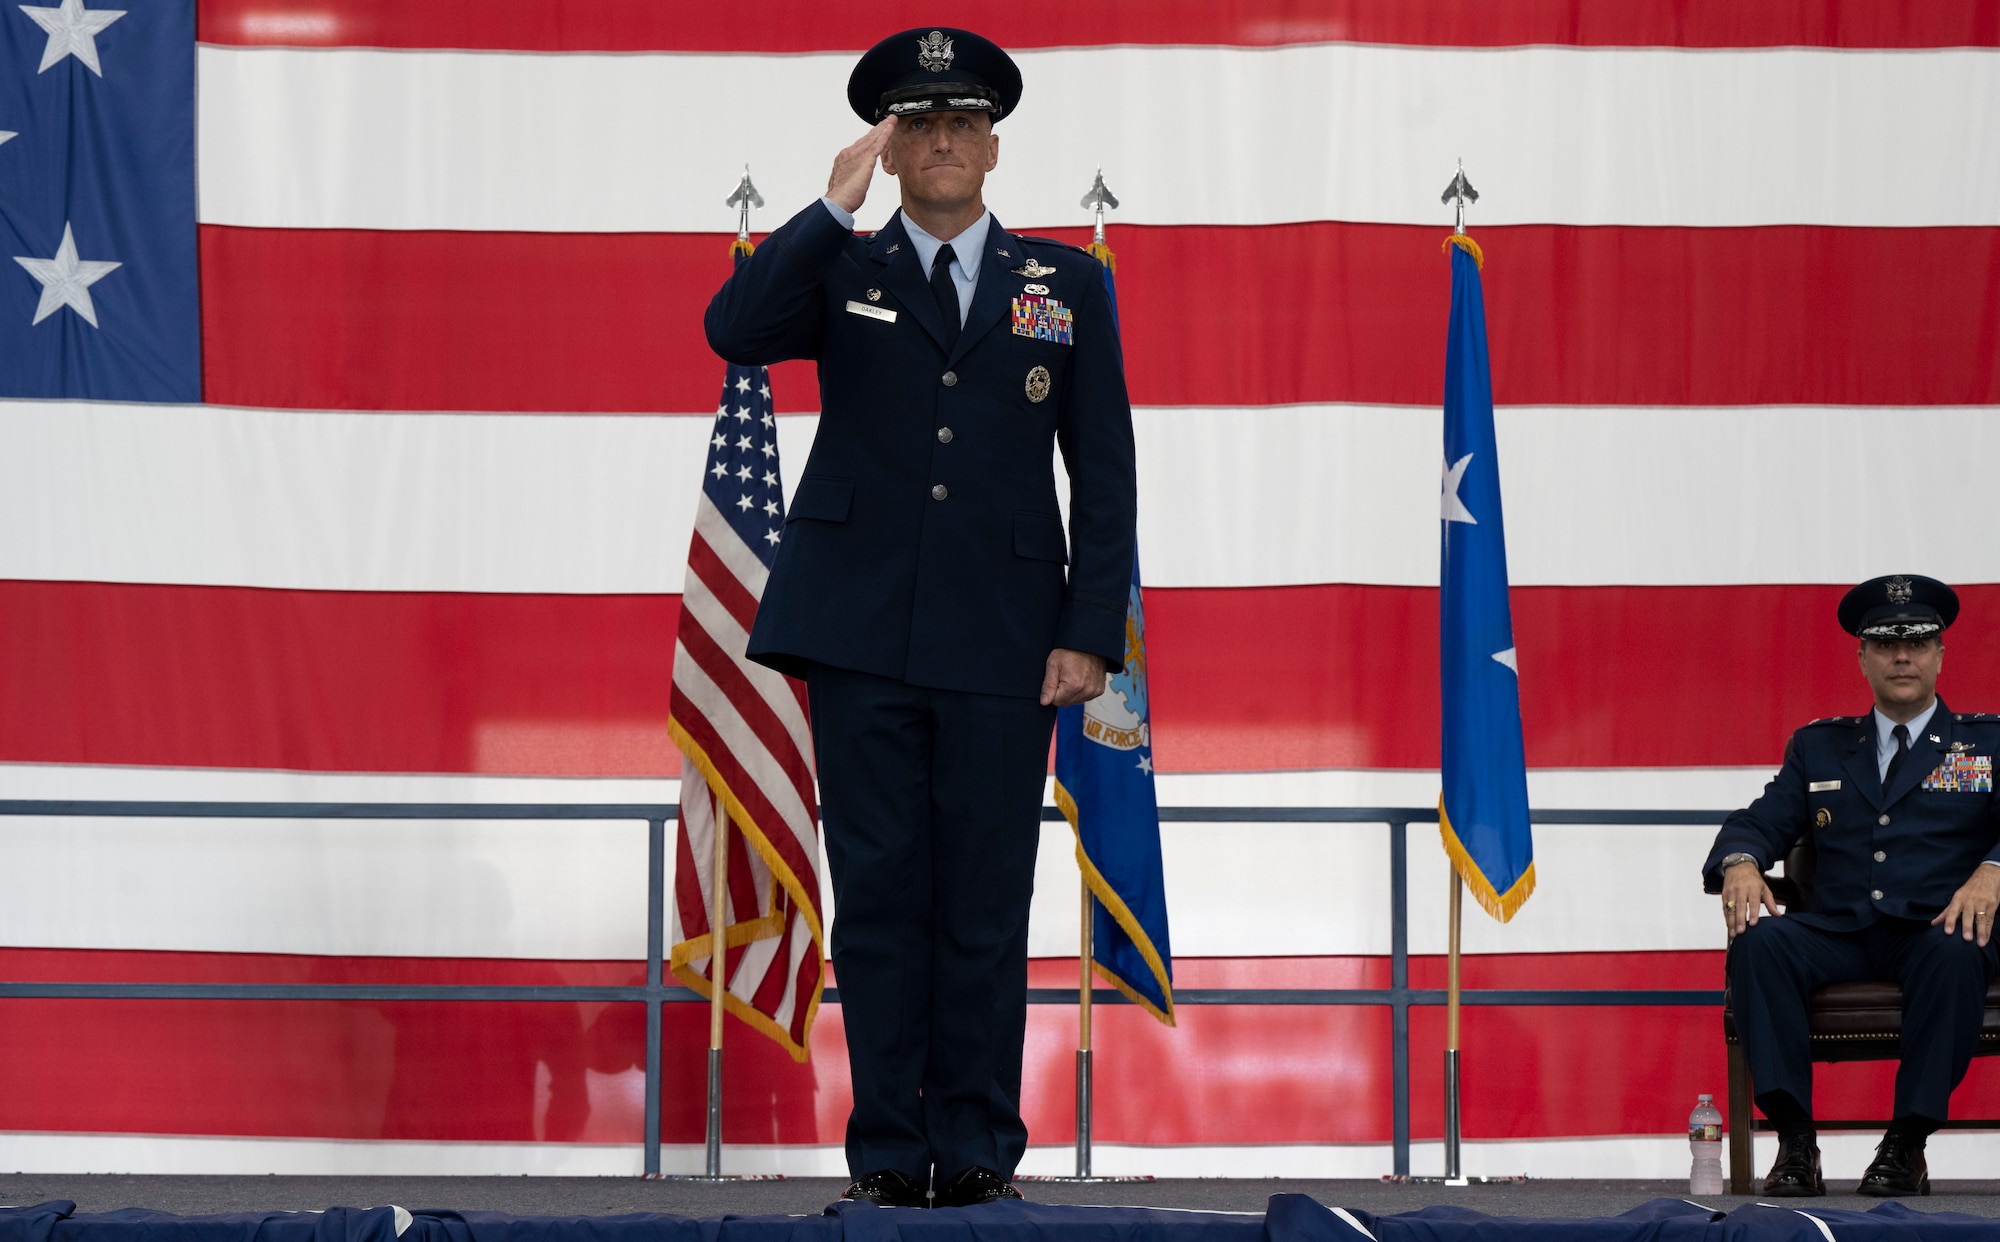 U.S. Air Force Col. Derek C. Oakley, incoming 28th Bomb Wing commander, renders his first salute as commander during a change of command ceremony at Ellsworth Air Force Base, South Dakota, June 23, 2023.